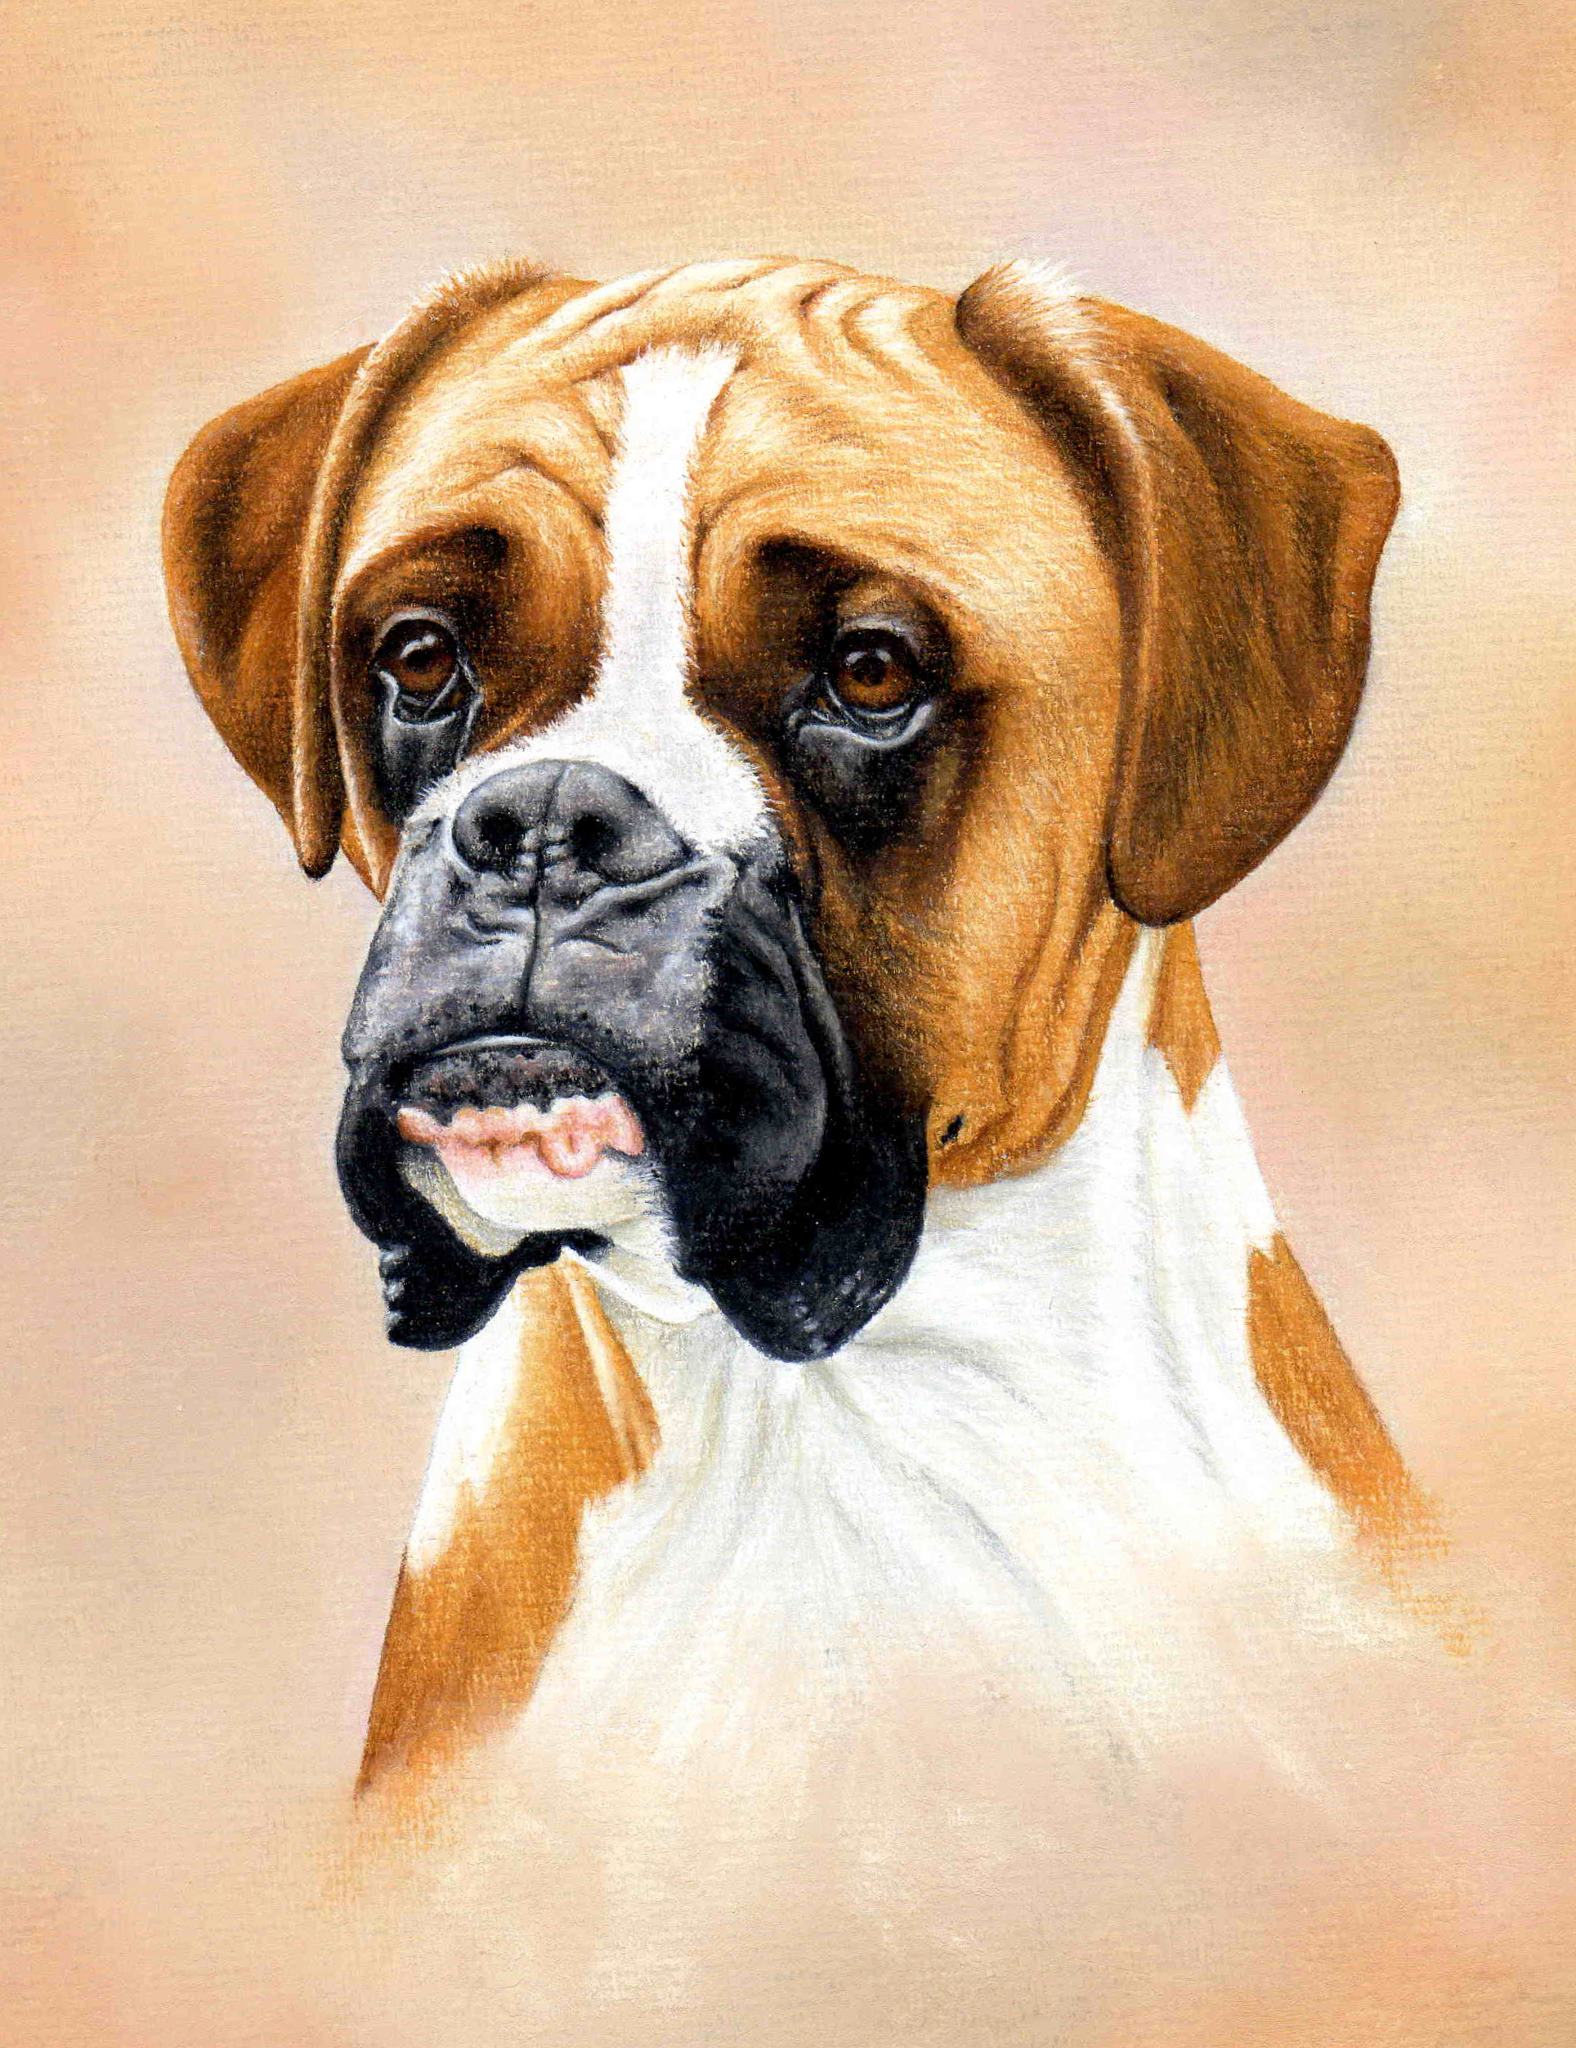 Boxer Dog Drawing at GetDrawings.com | Free for personal use Boxer ...